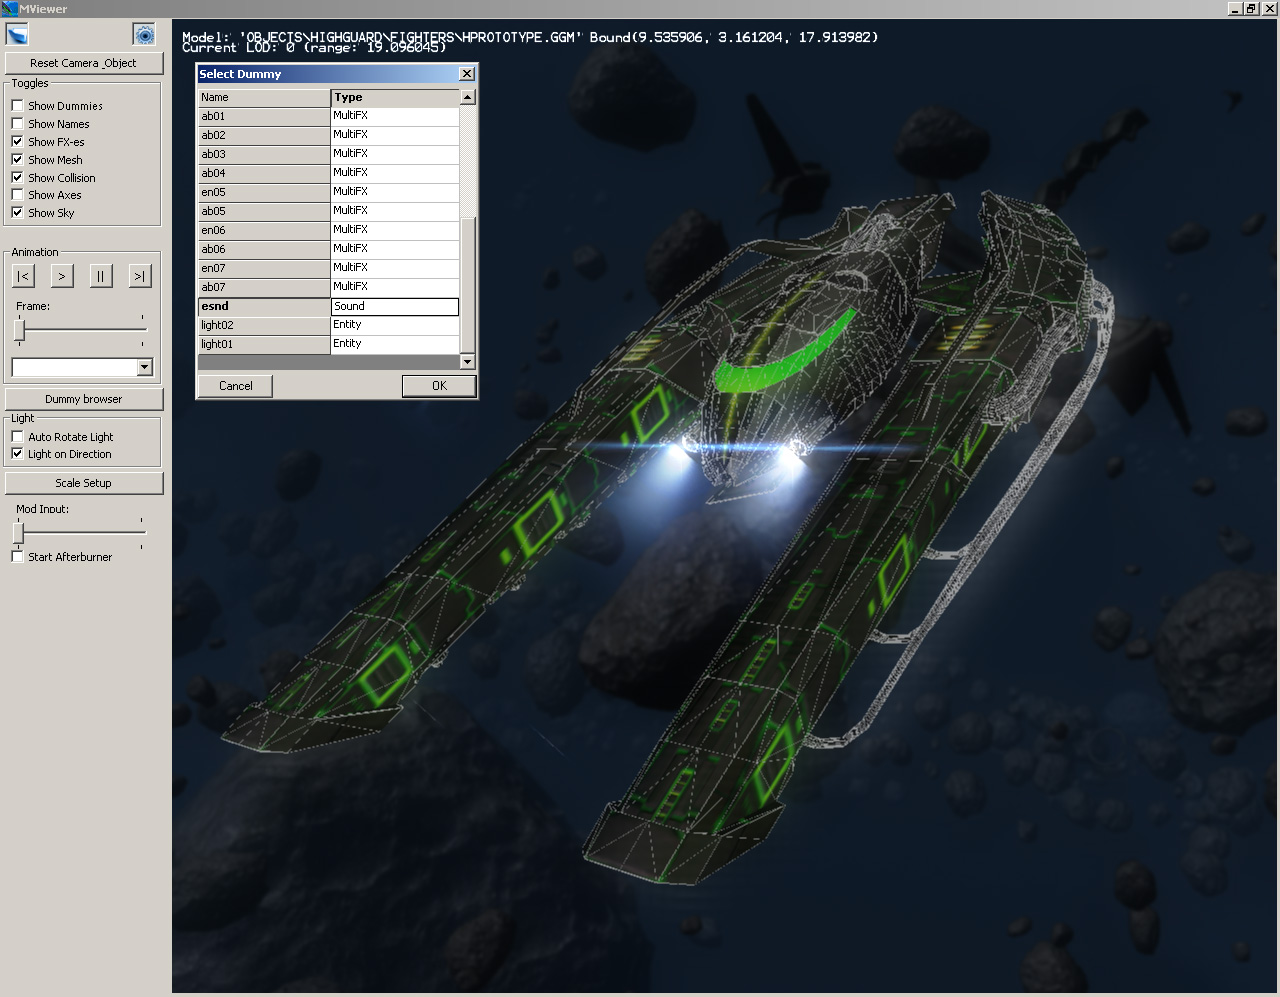 The model viewer in action, showing various information about the currently opened mesh.